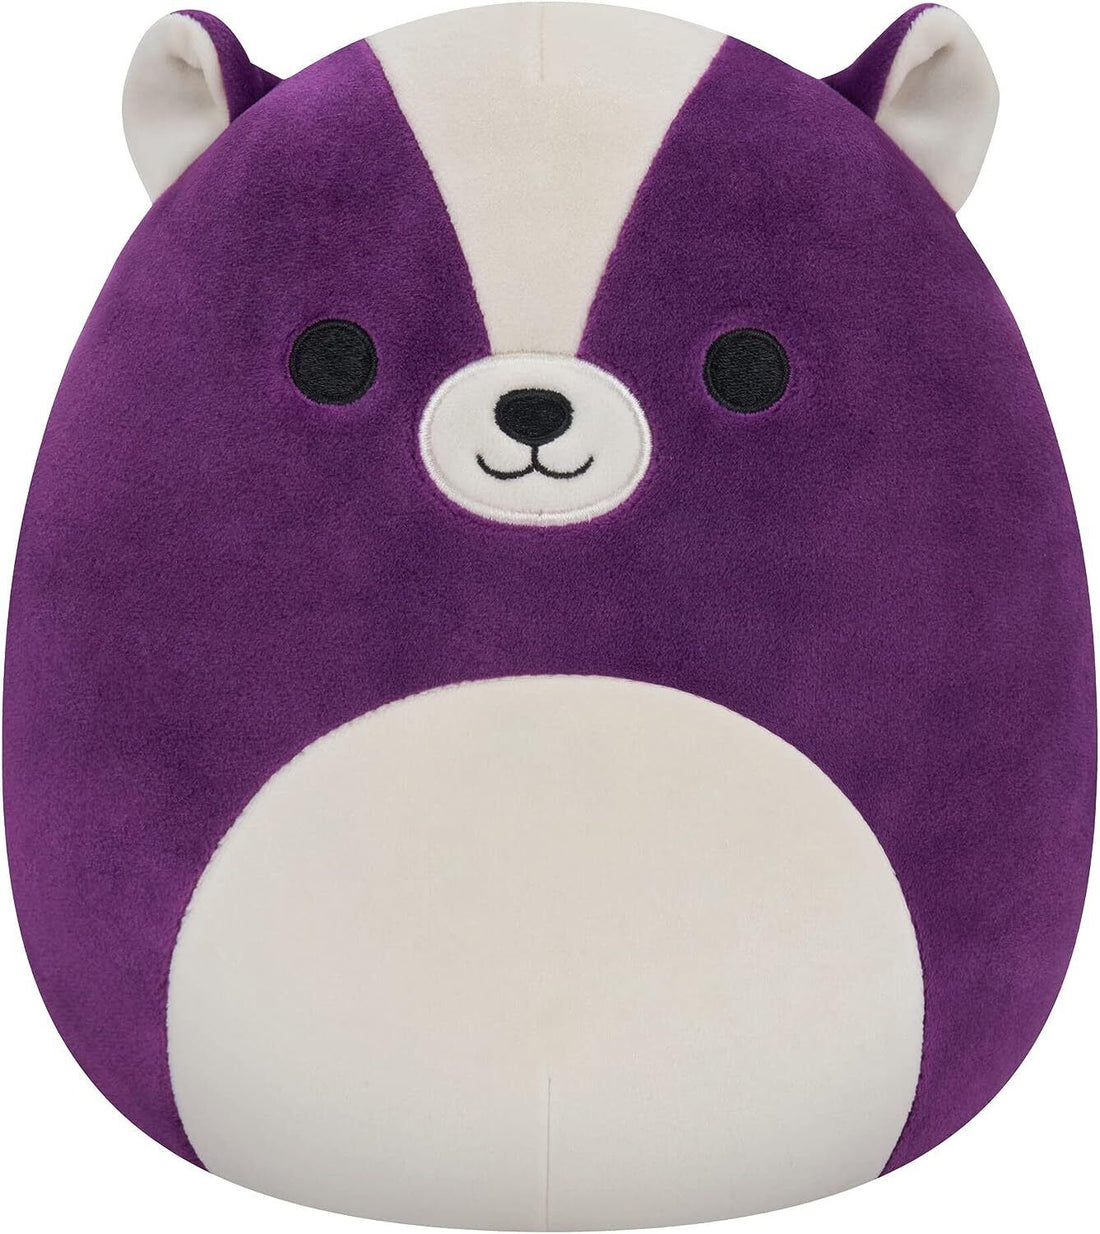 Squishmallows Squishmallow 7.5-Inch SOFT CUDDLE Toy Cute Animal Pillow Kid GIFT - SLOAN